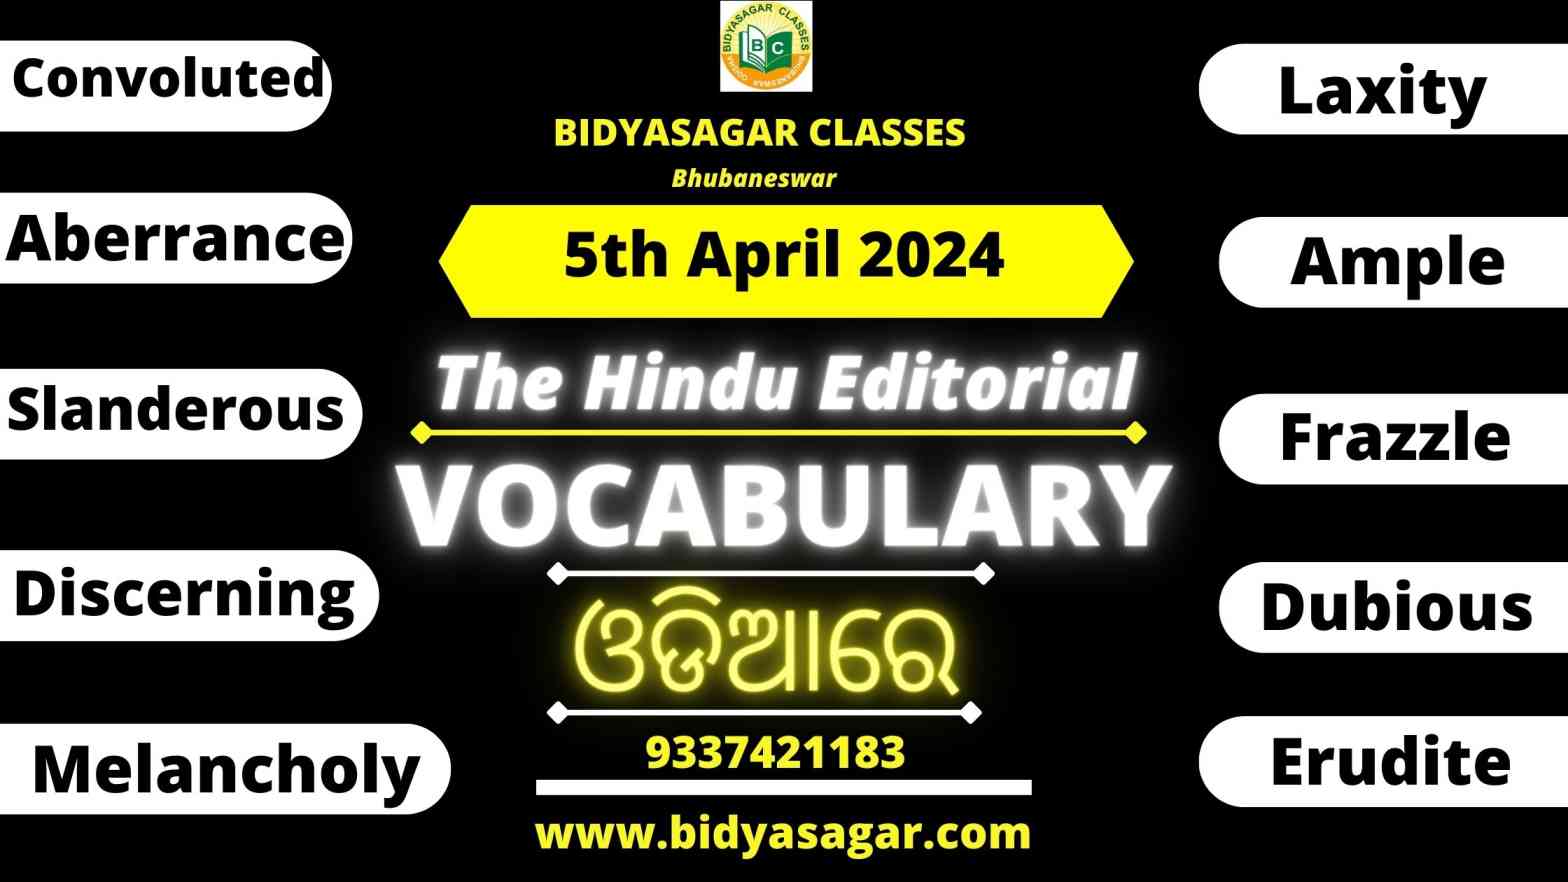 The Hindu Editorial Vocabulary of 5th April 2024